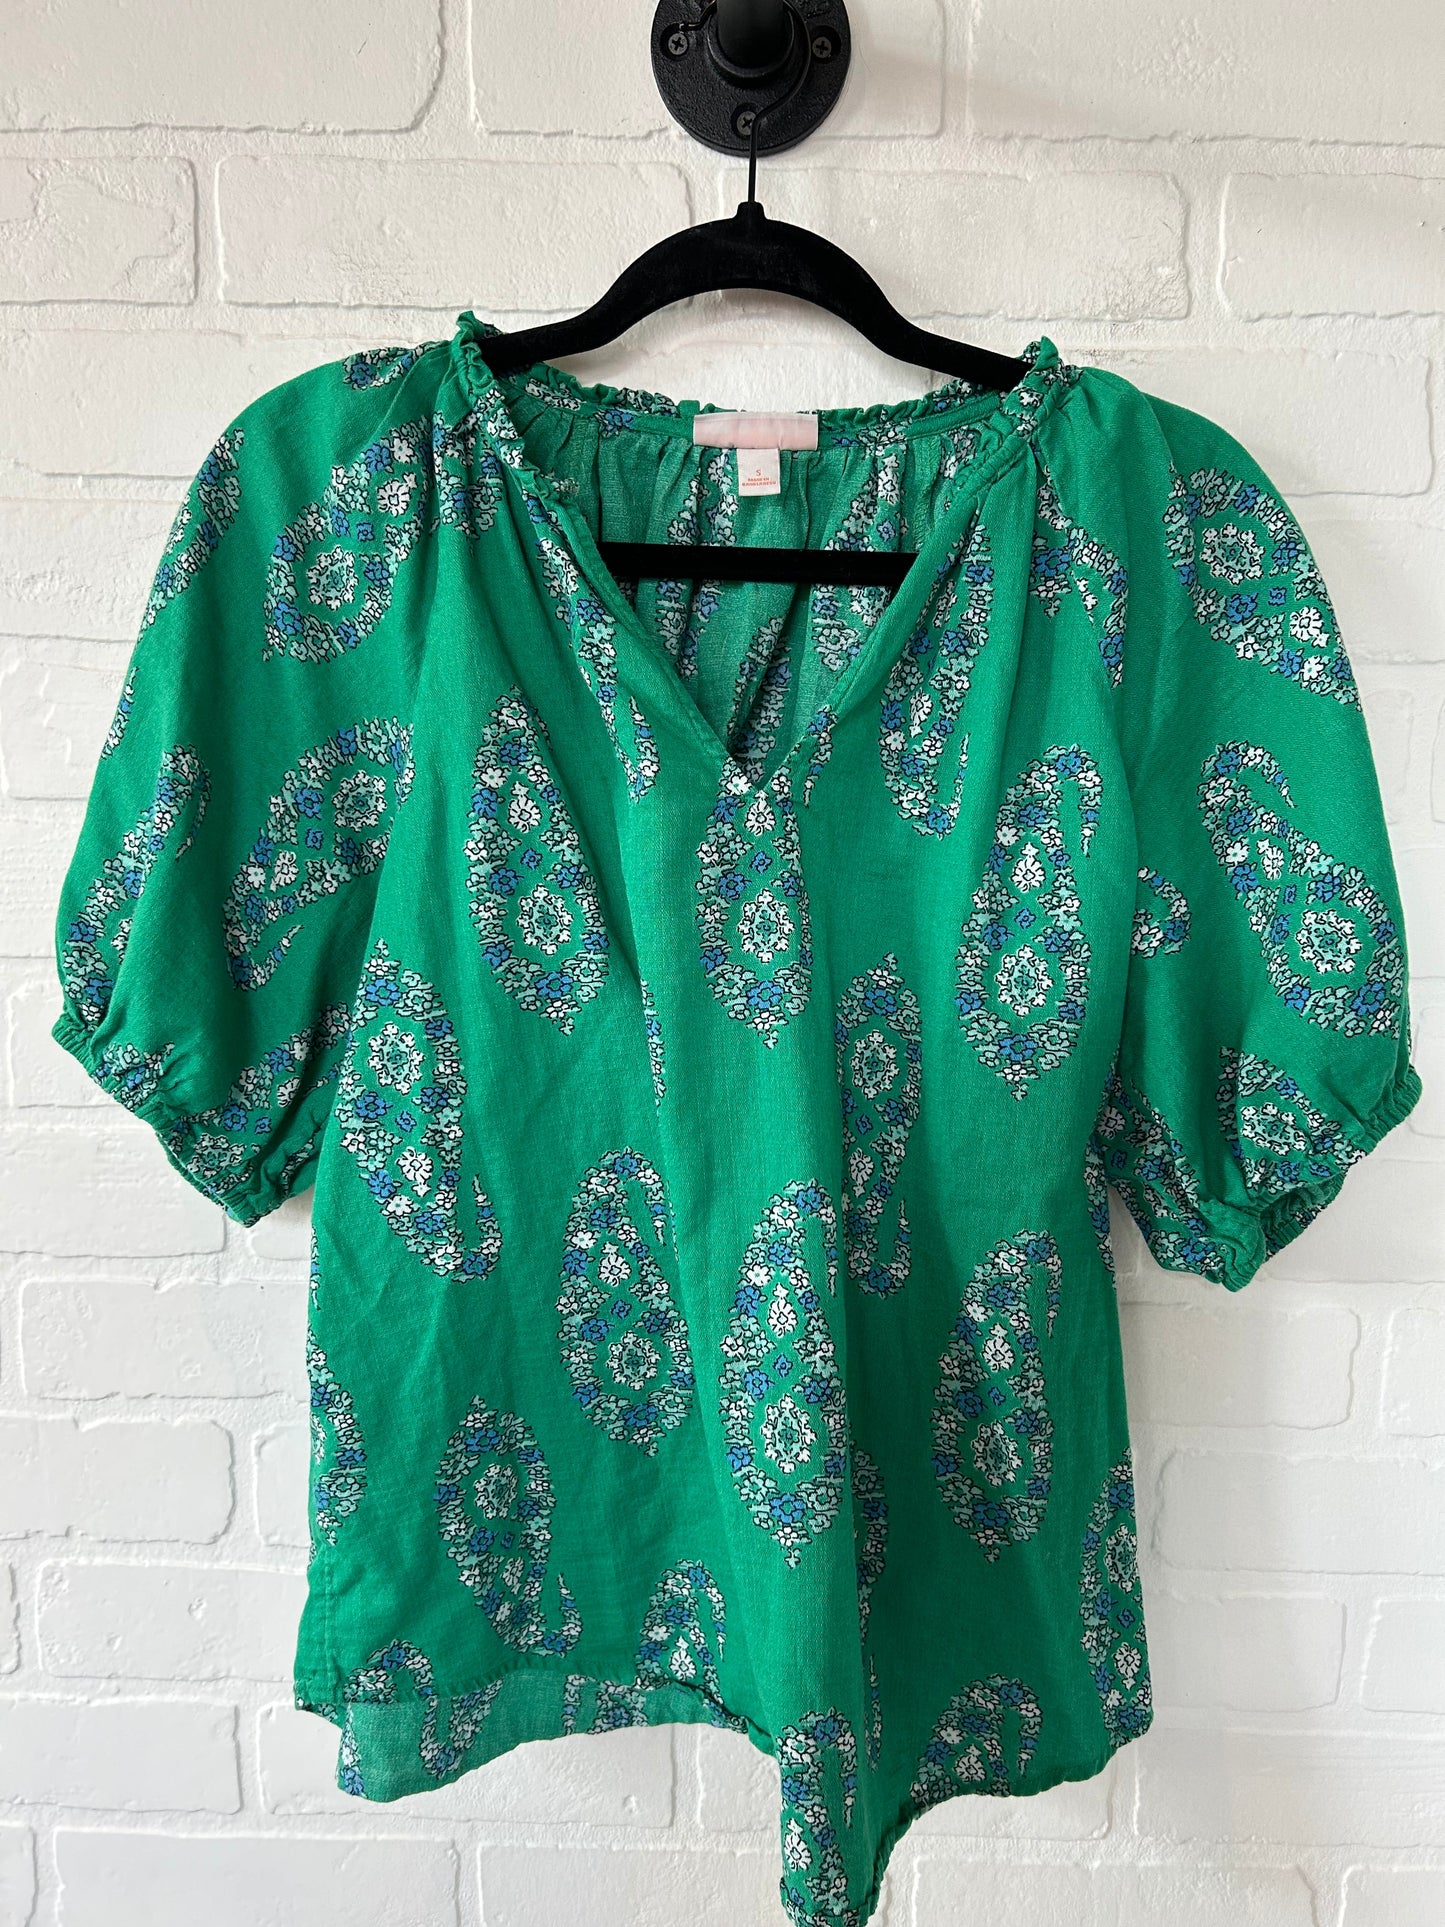 Green Top Short Sleeve Knox Rose, Size S